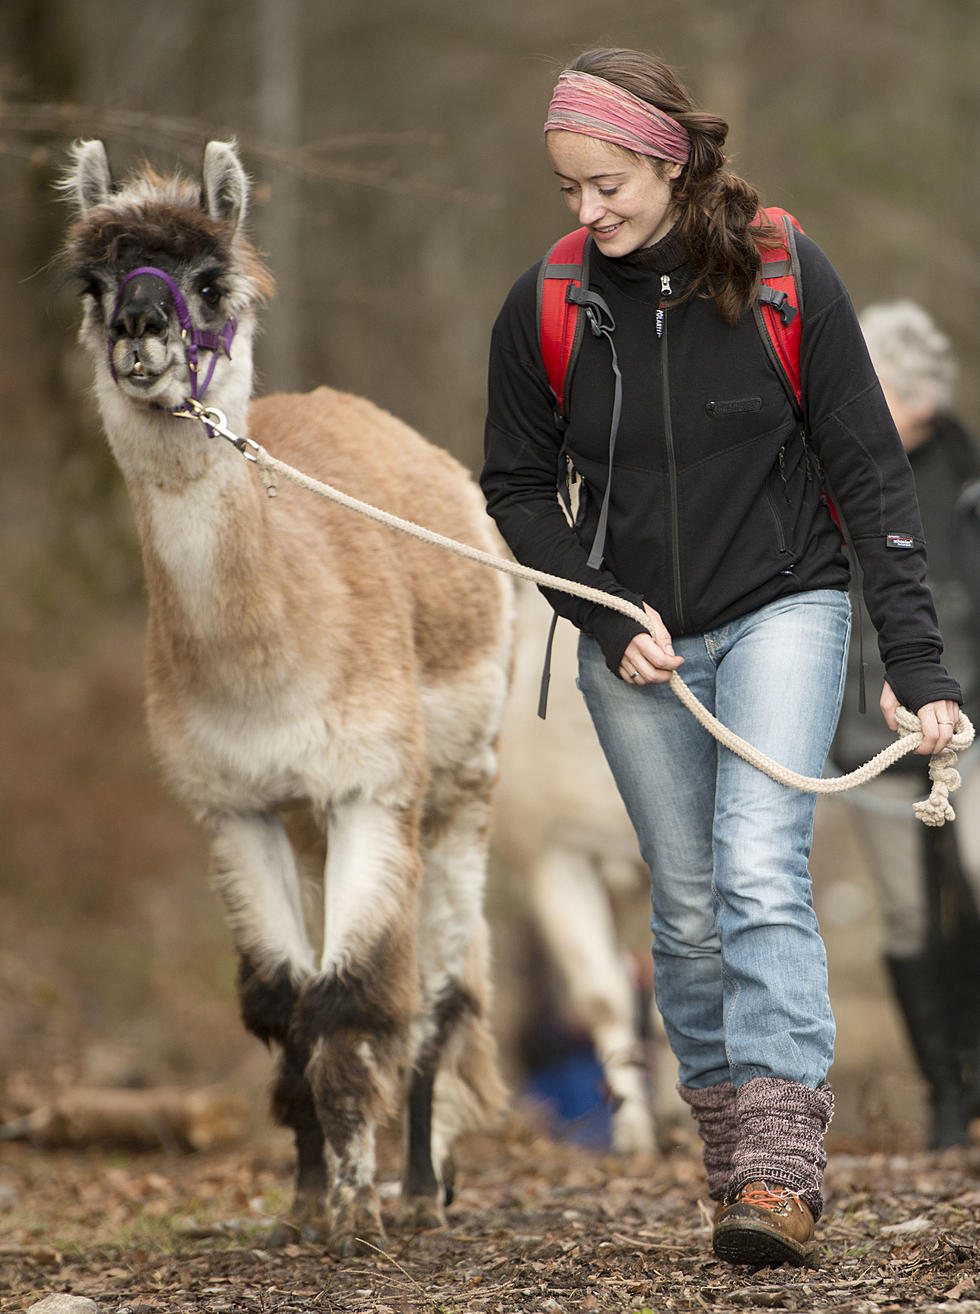 Want to Take a Walk With a Llama? You Can in Connecticut … It’s a Thing!